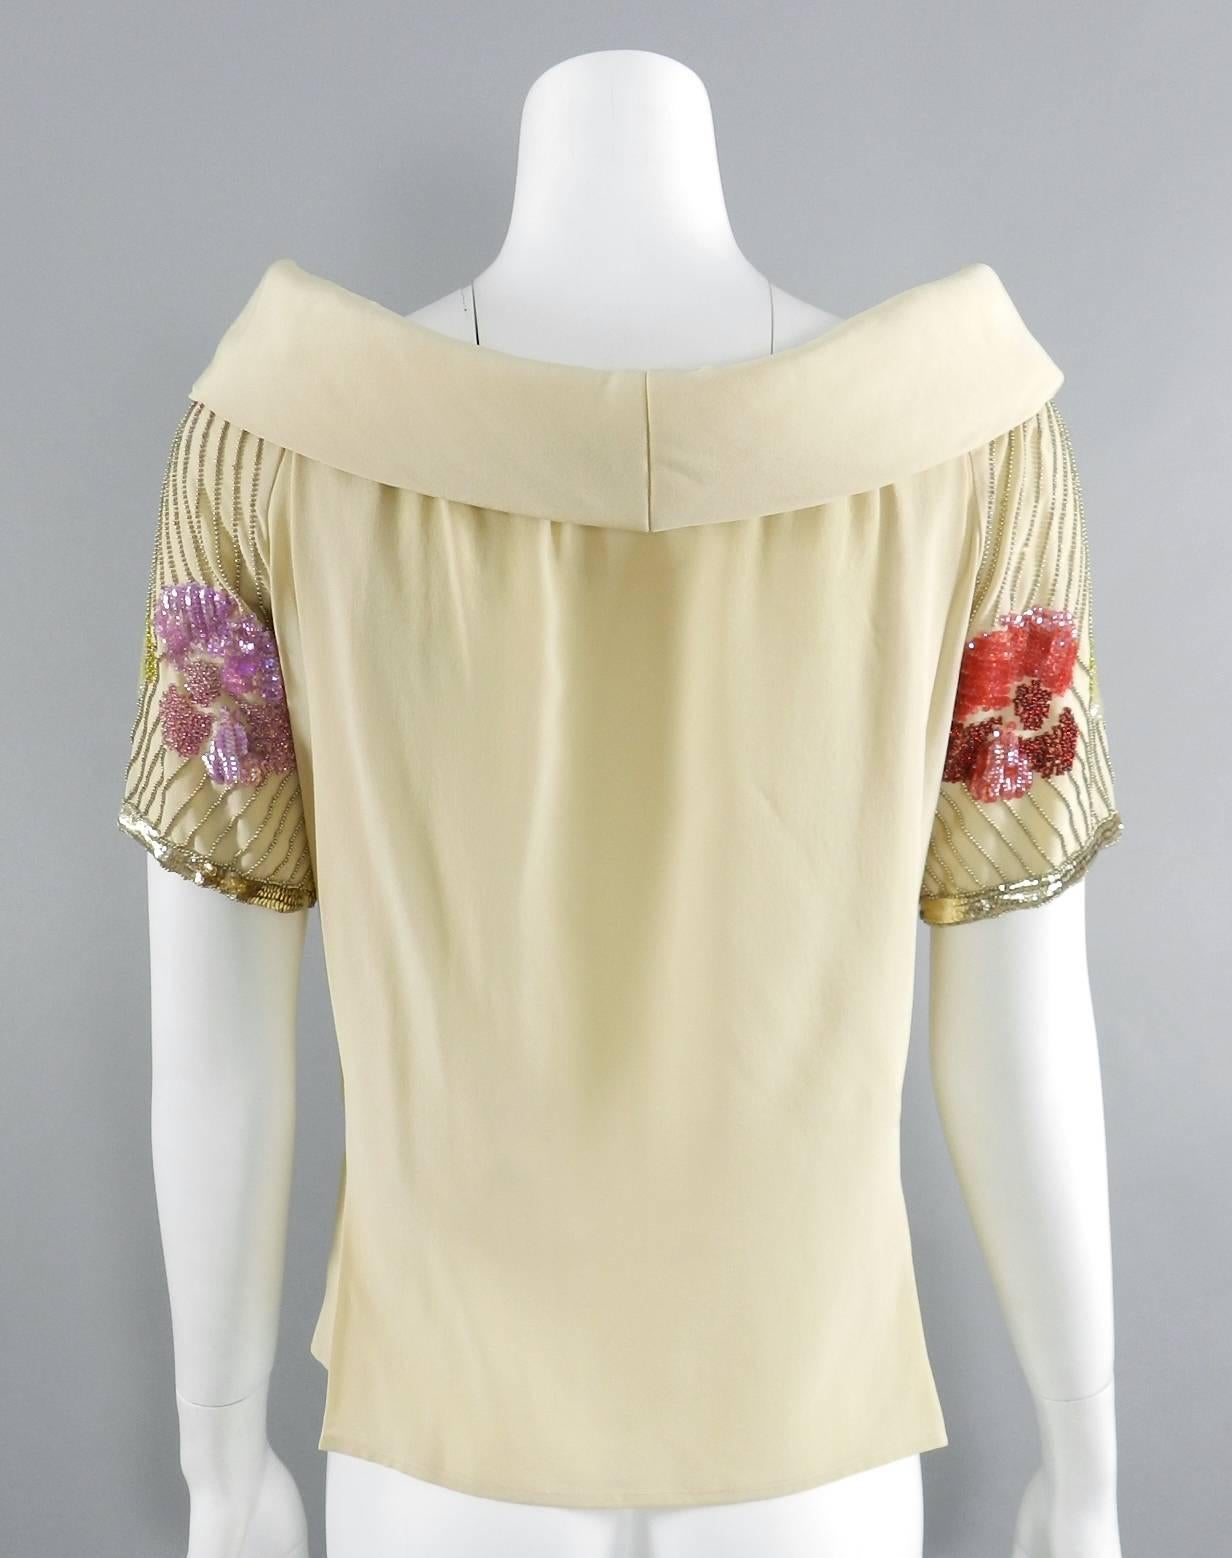 Chloe Vintage 1970's Beige  Sequin Beaded Silk Top.  Wide scoop neck design with padded collar.  Sleeves are decorated with sequins and floral beaded design. Garment is pleated at back and darted at centre back waist. Size tag is not present but